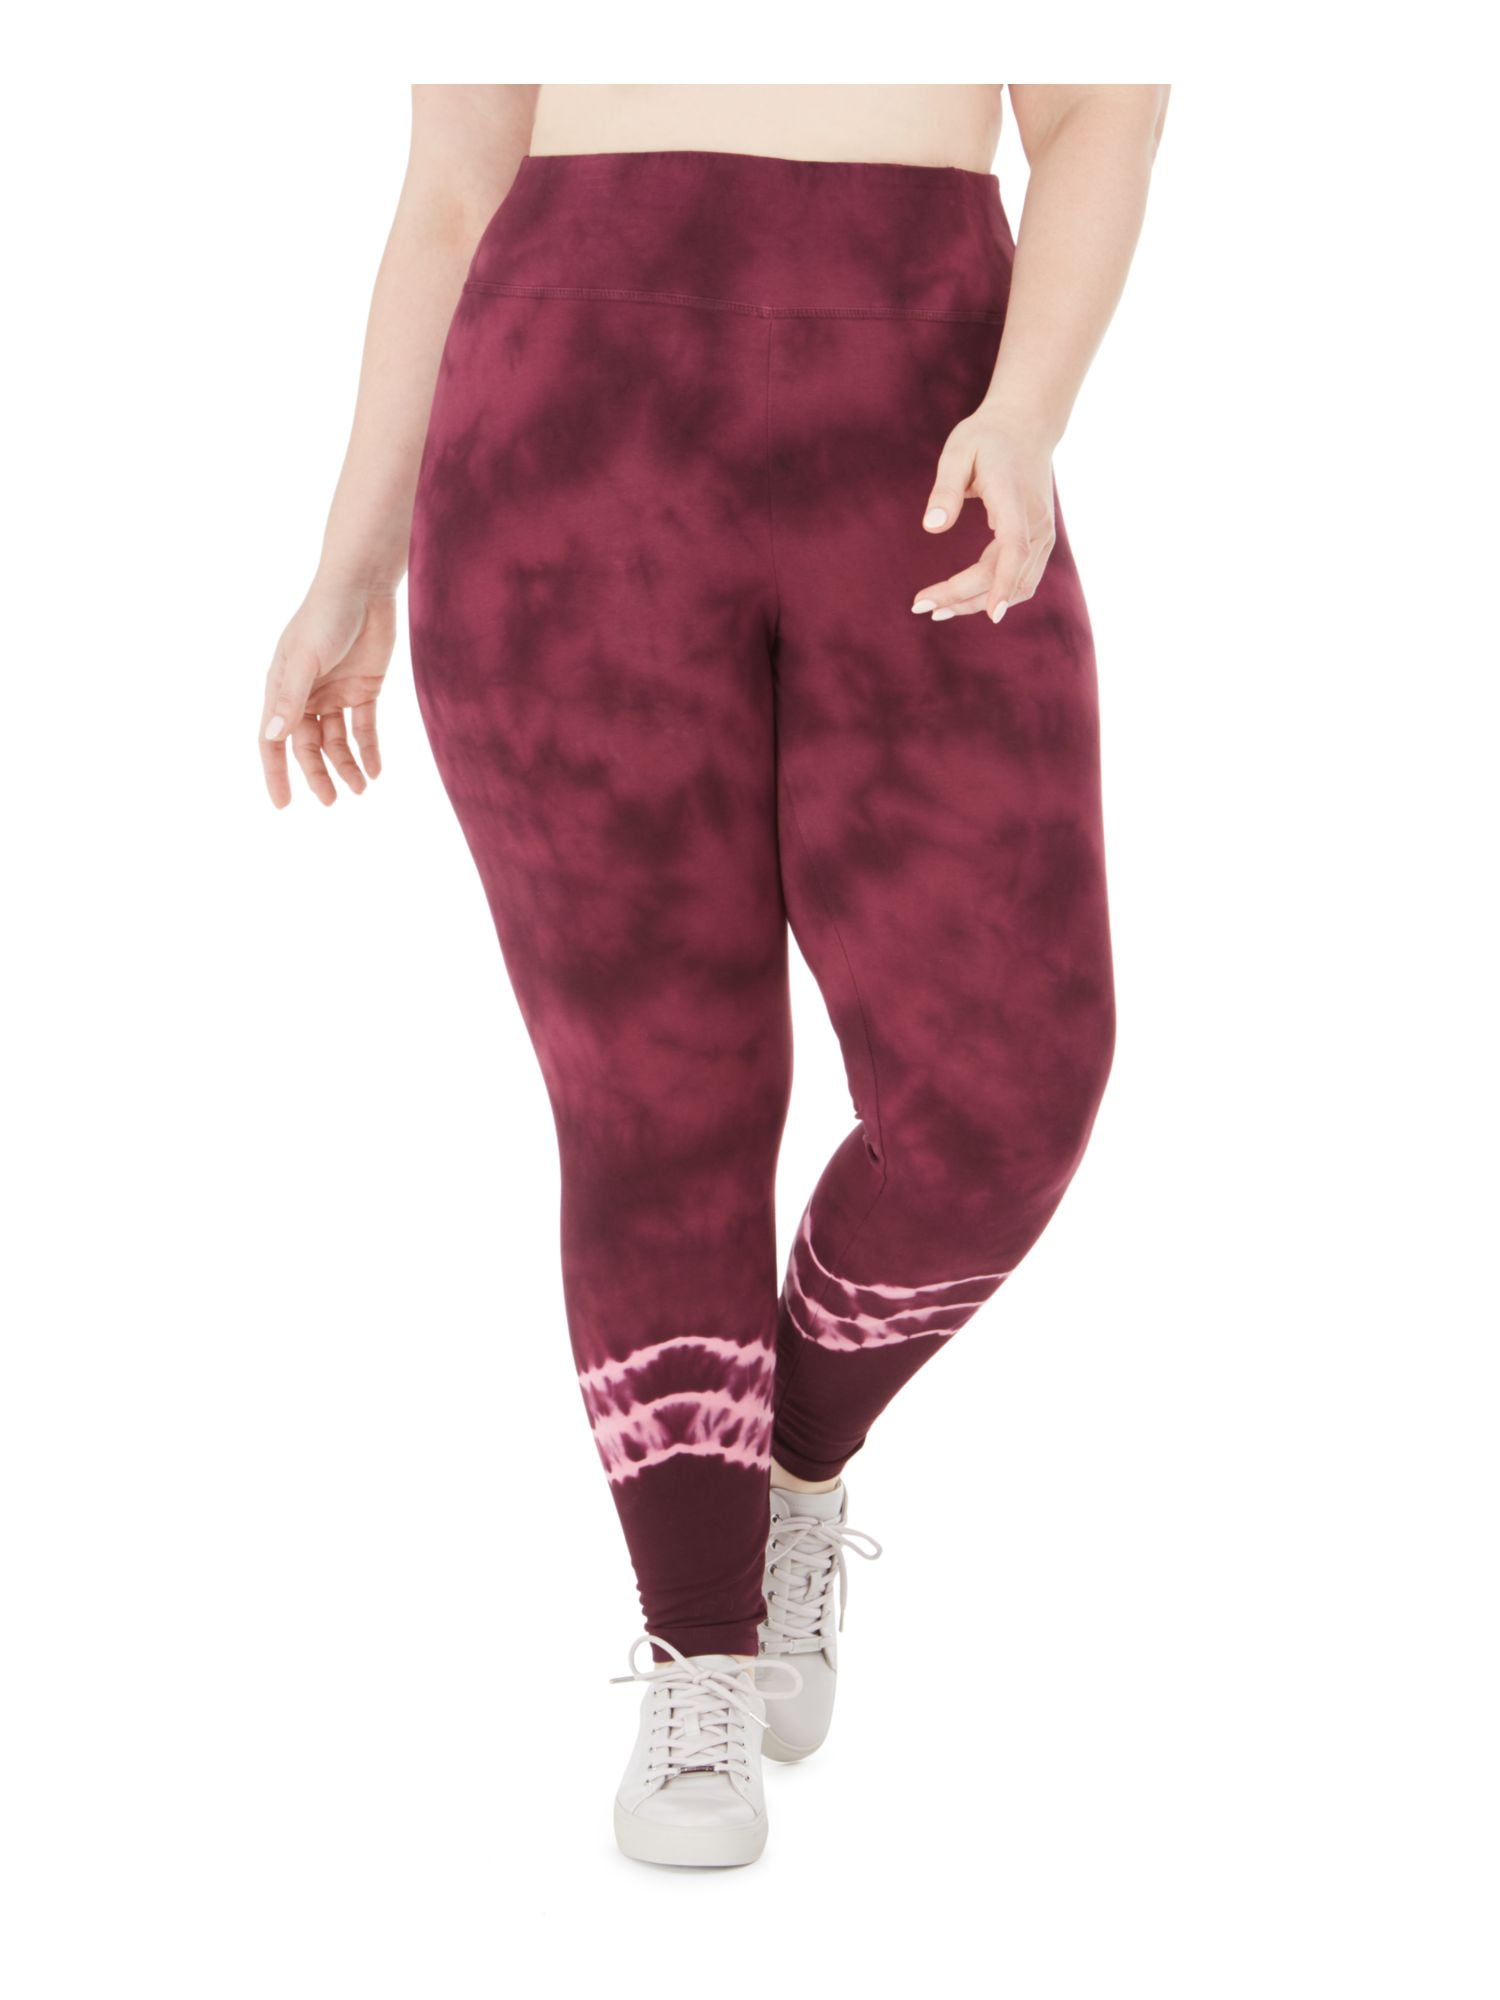 Ideology Women's Plus Mid-Rise Ankle Length Tie Dyed Leggings Size